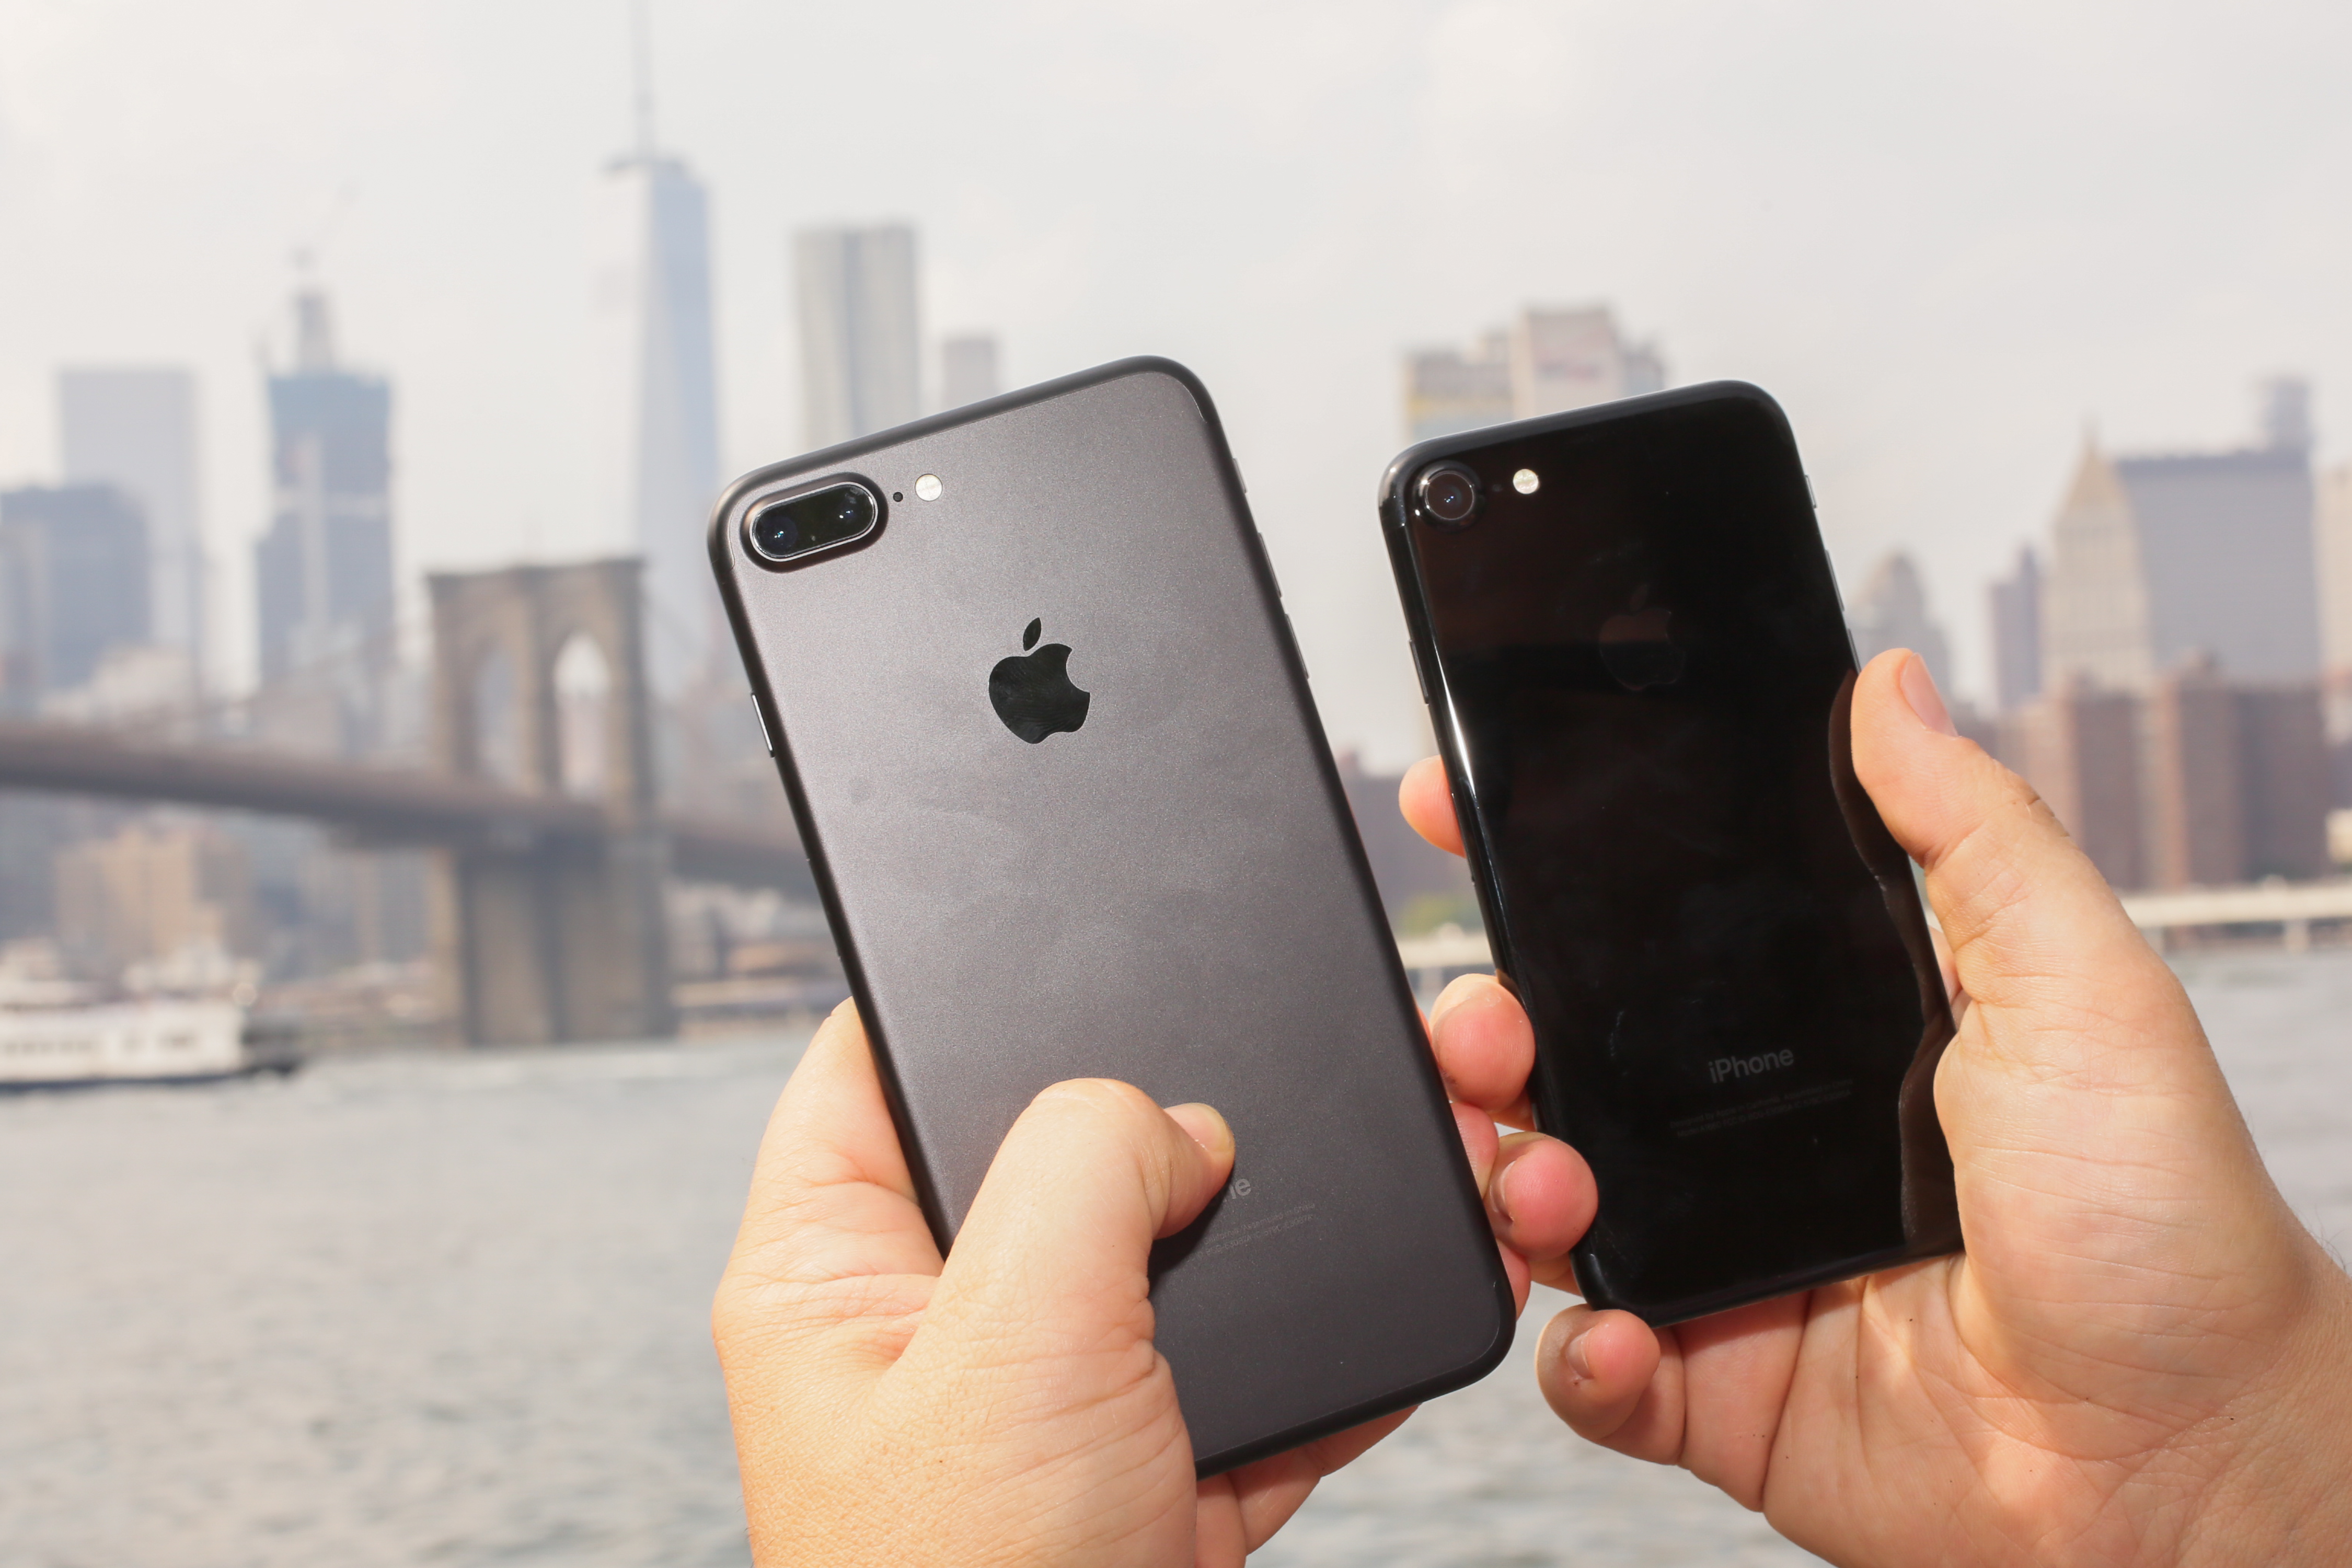 Blank Gå ud Koncession Apple iPhone 7 Plus review: The photographer's phone - CNET